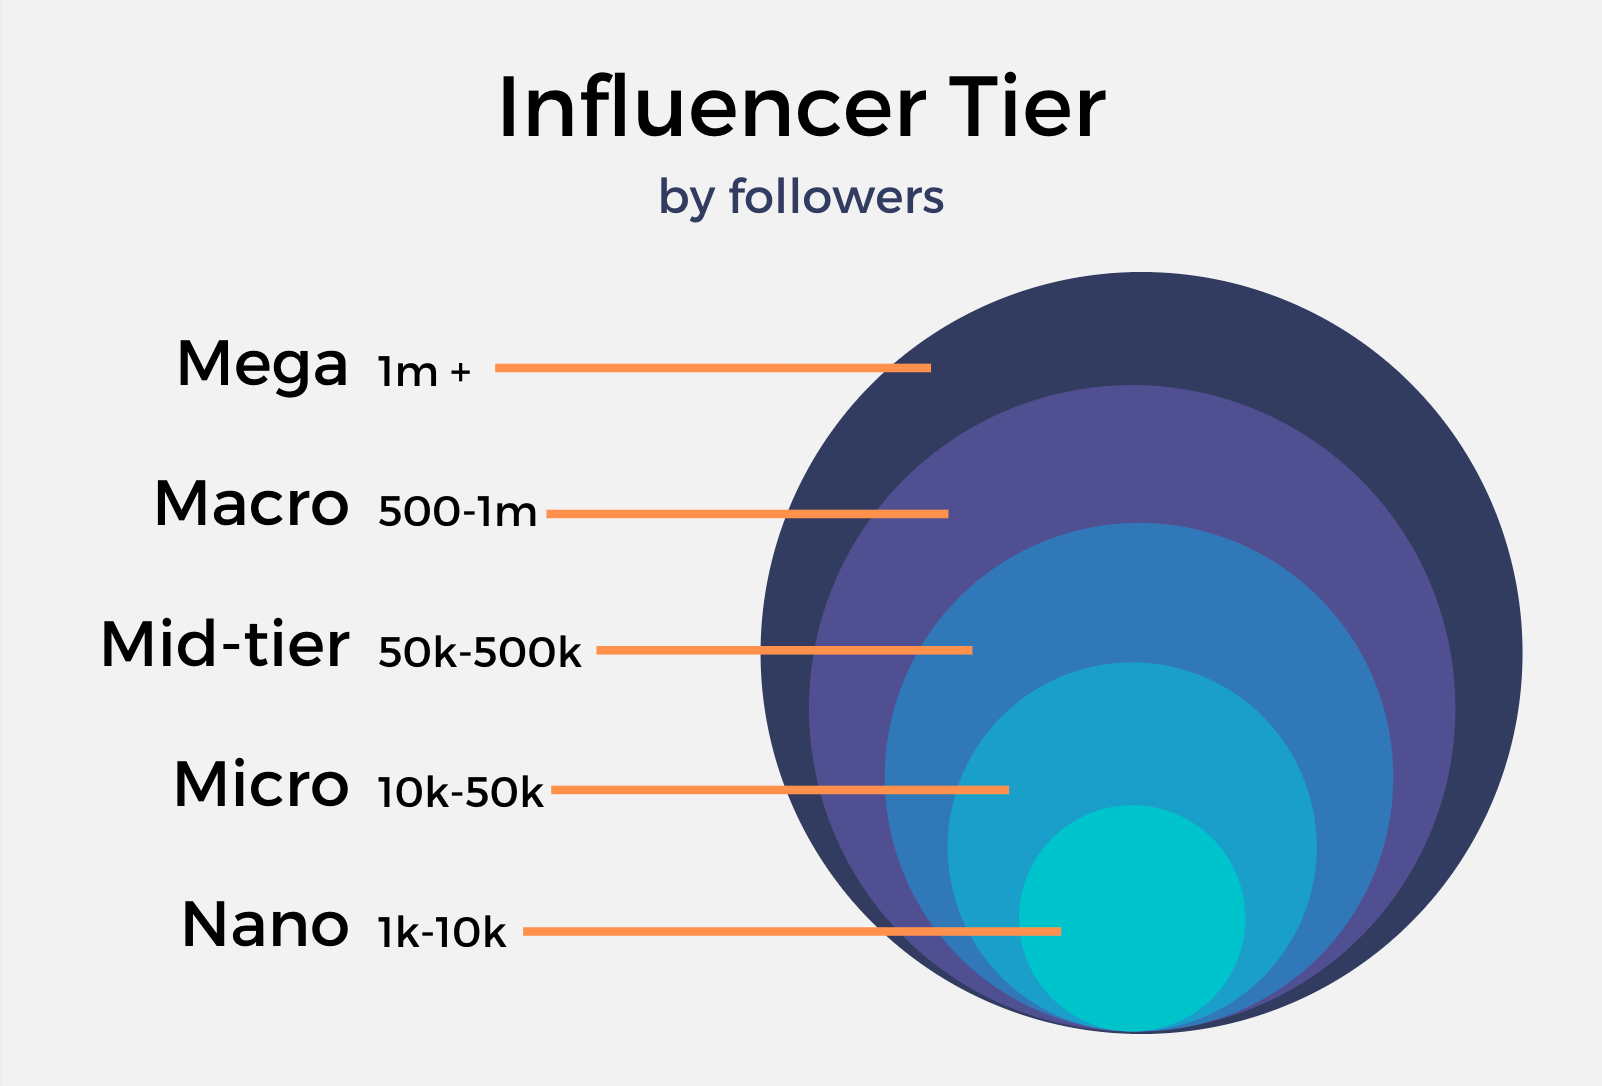 Influencer Tier By Follower Count